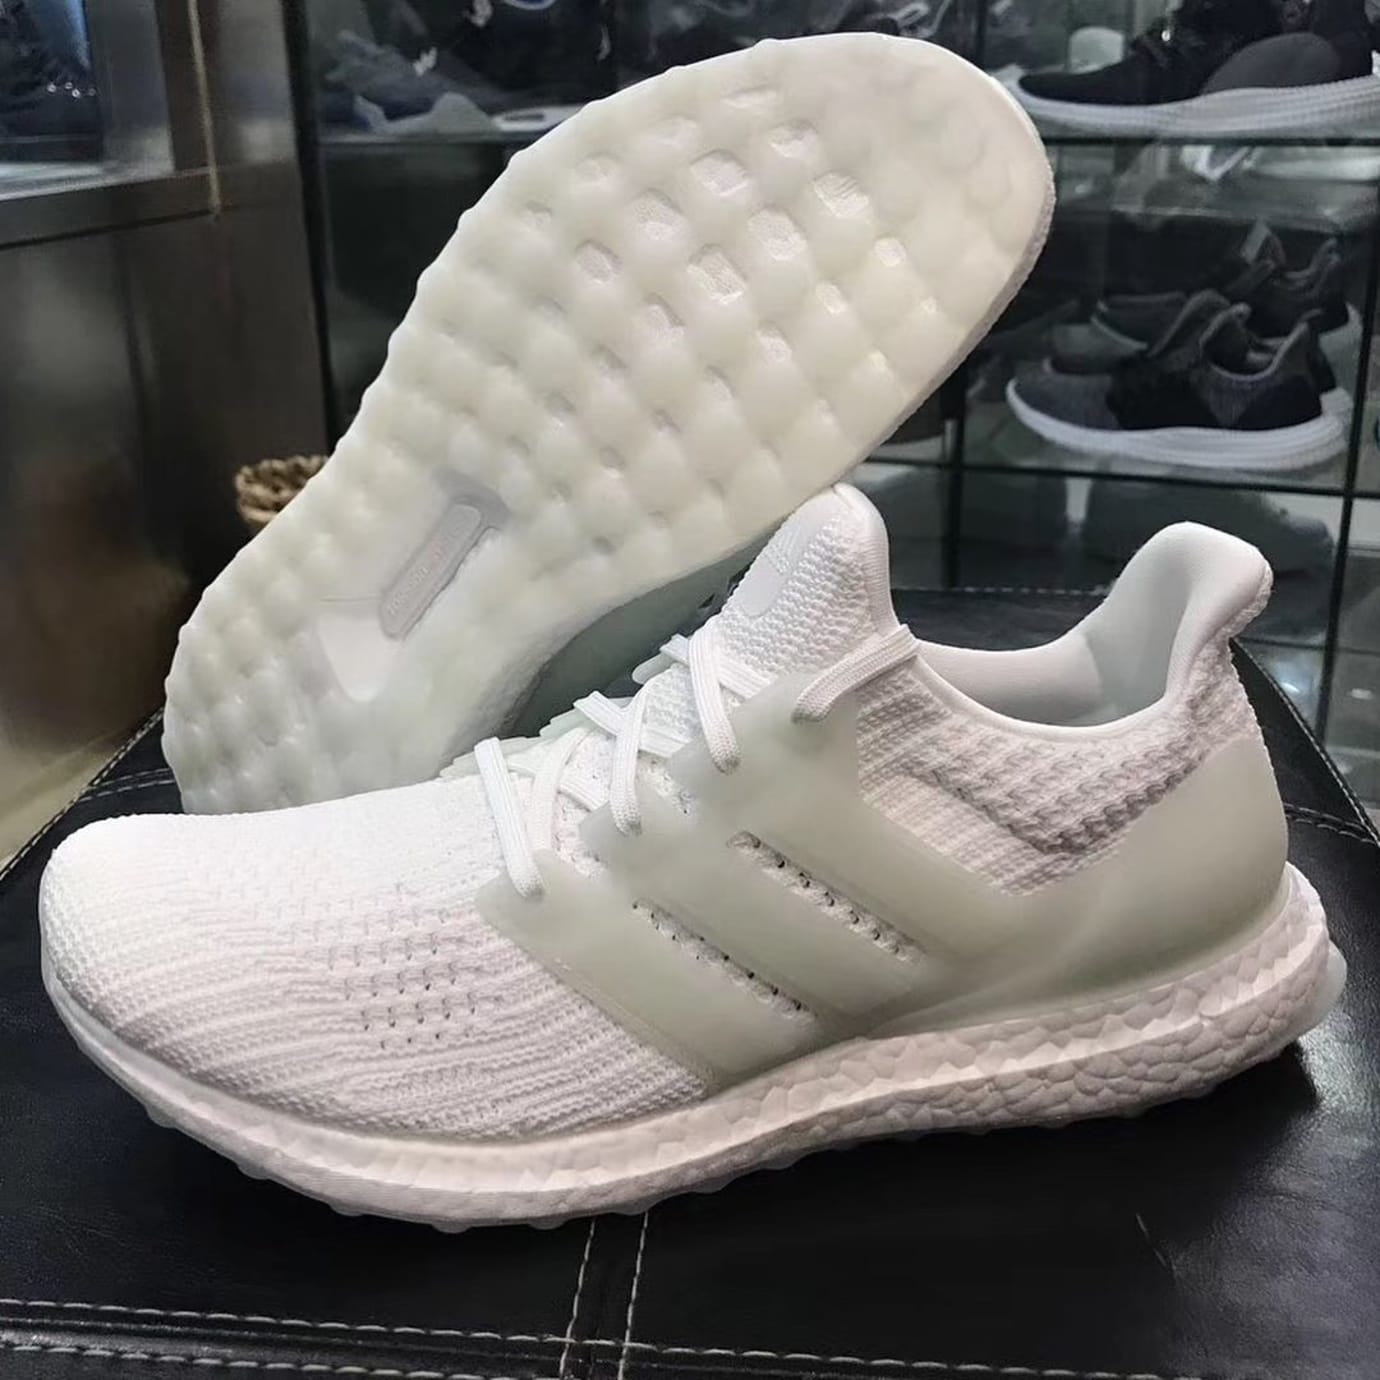 Adidas Ultra Boost 3.0 Review Believe The Hype! A Near